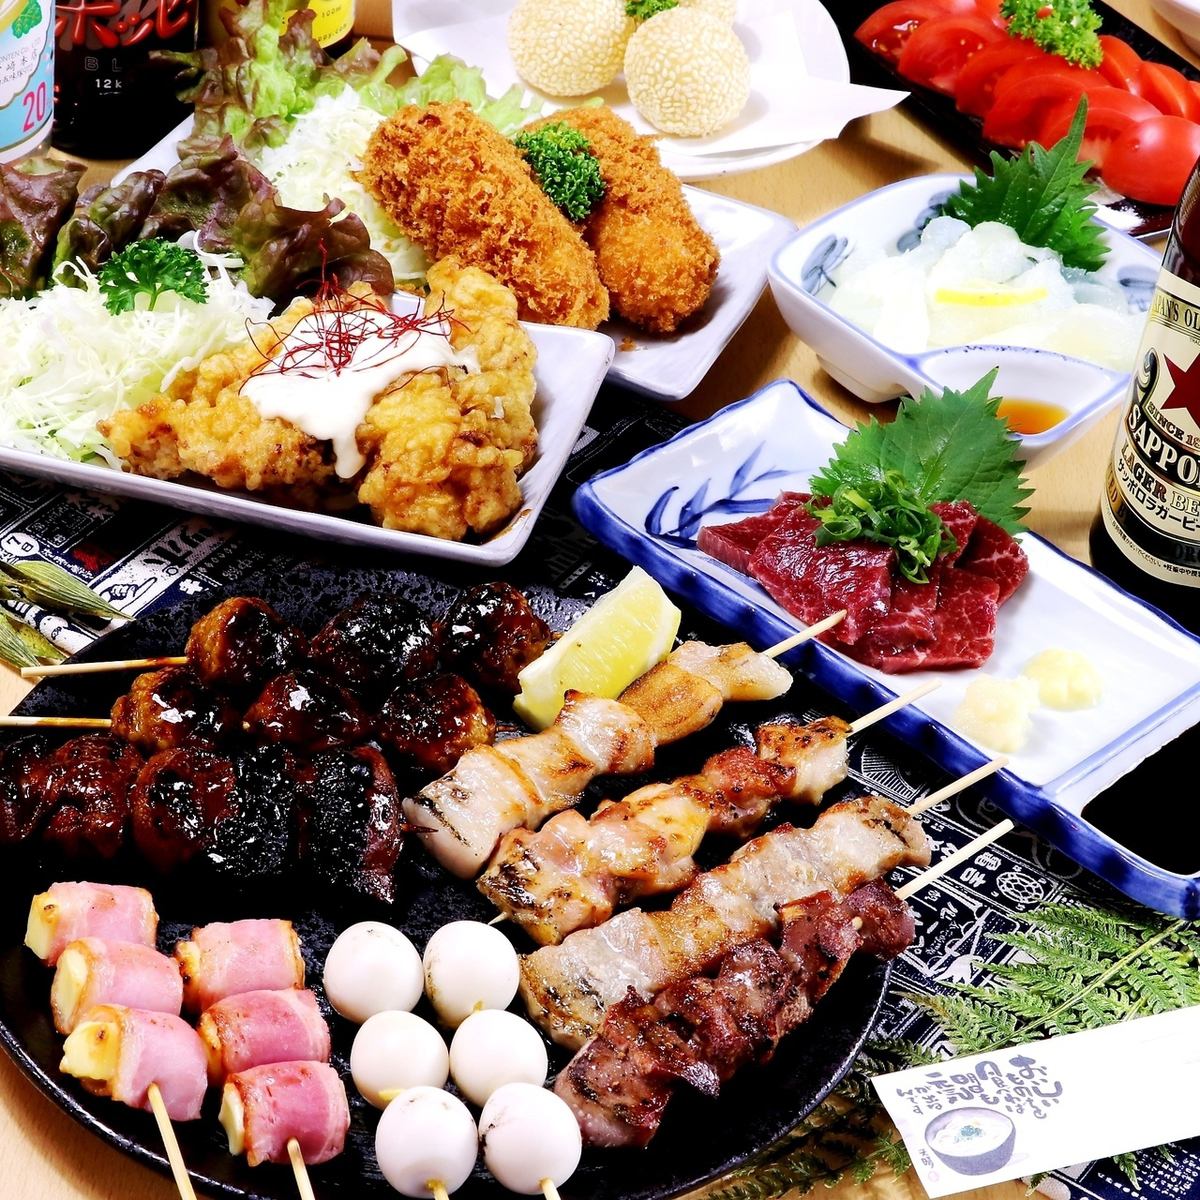 There are 110 types of all-you-can-eat and drink, including charcoal-grilled skewers, yakitori, and horsemeat sashimi.